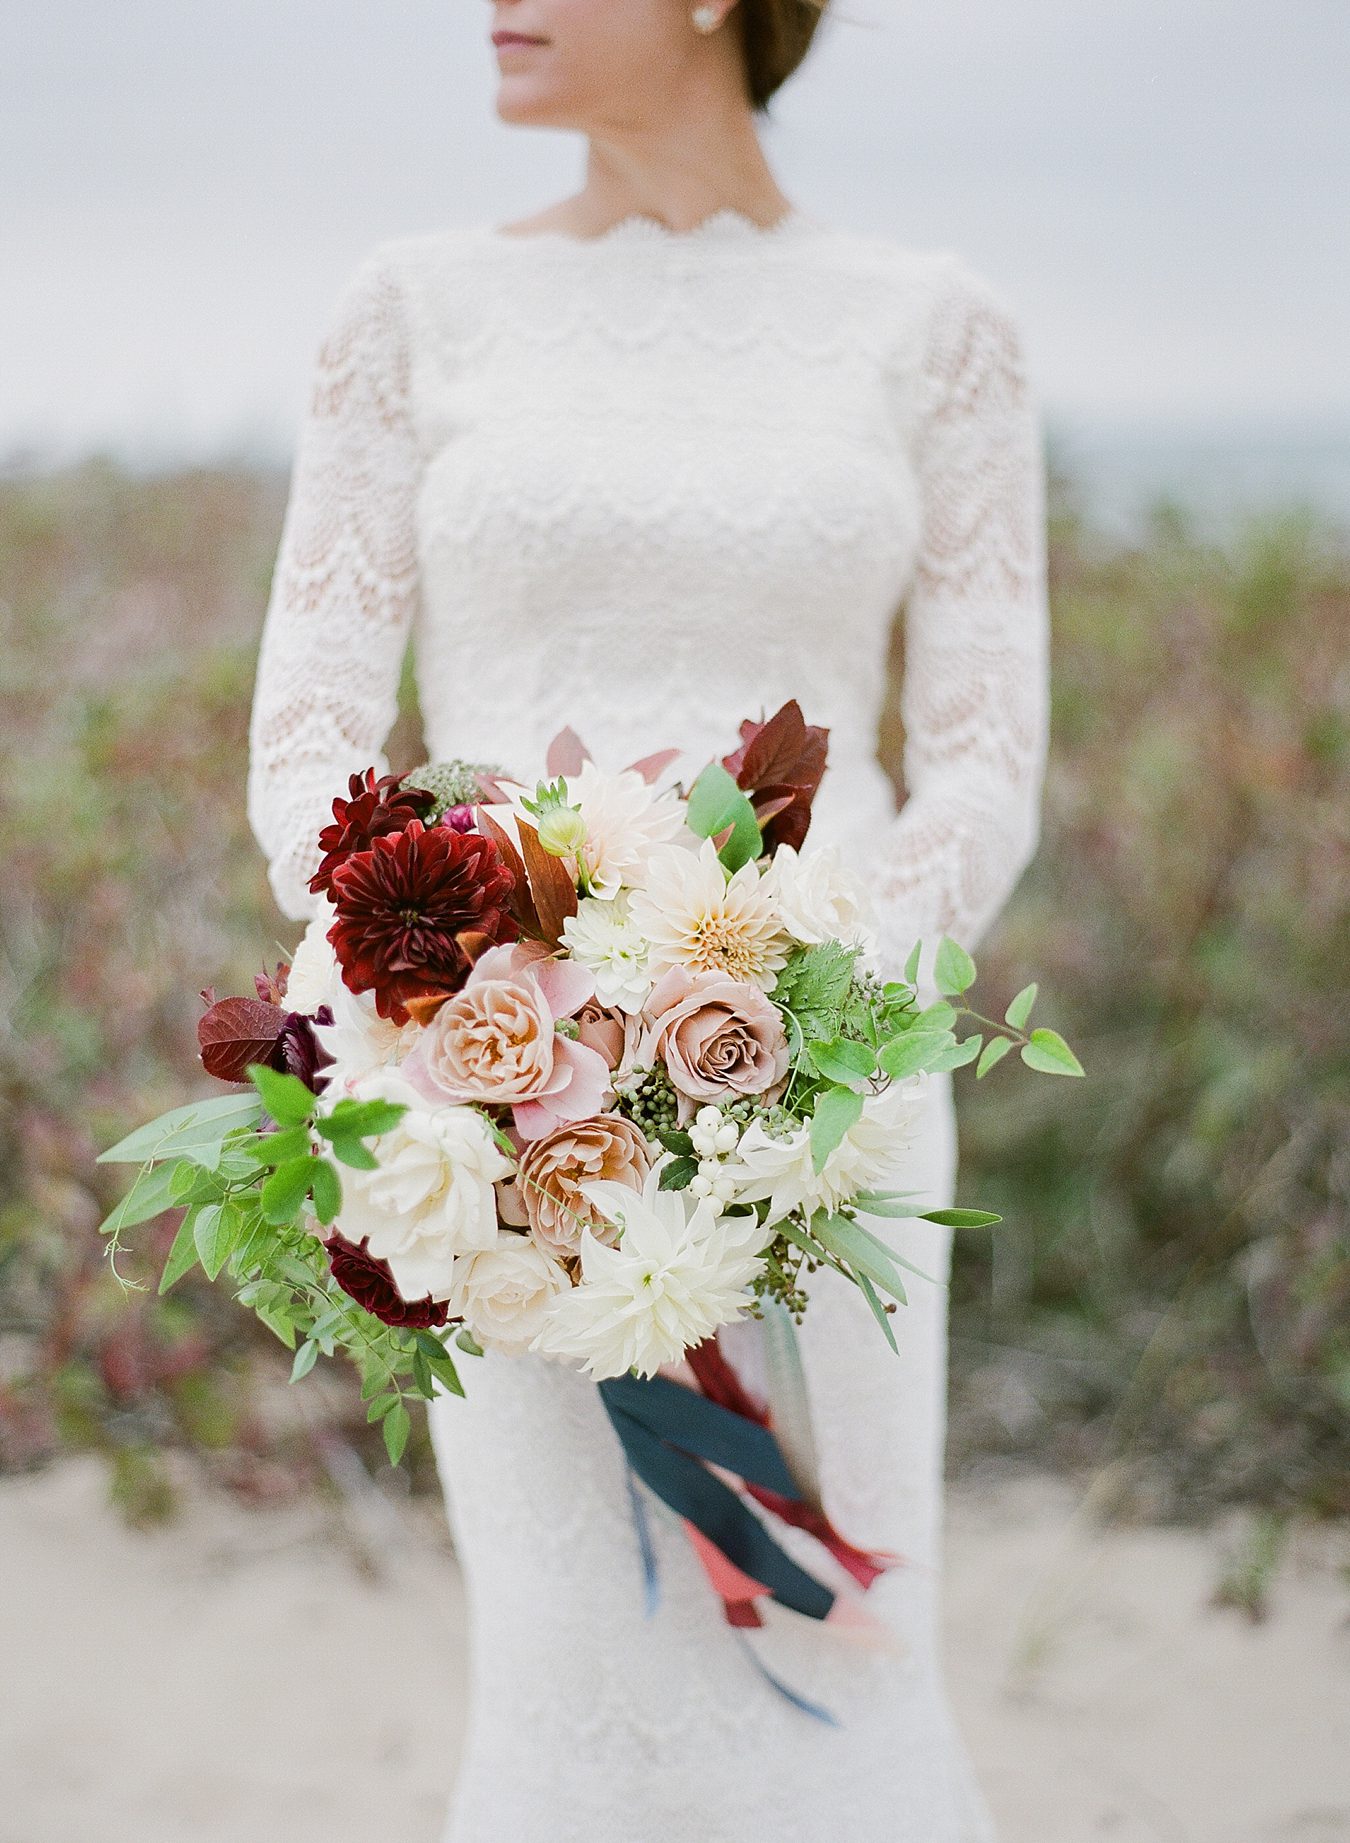 Daughters of Simone dress | Cory Weber Photography | Sincerely, Ginger Event Design & Production | BLOOM Floral Design